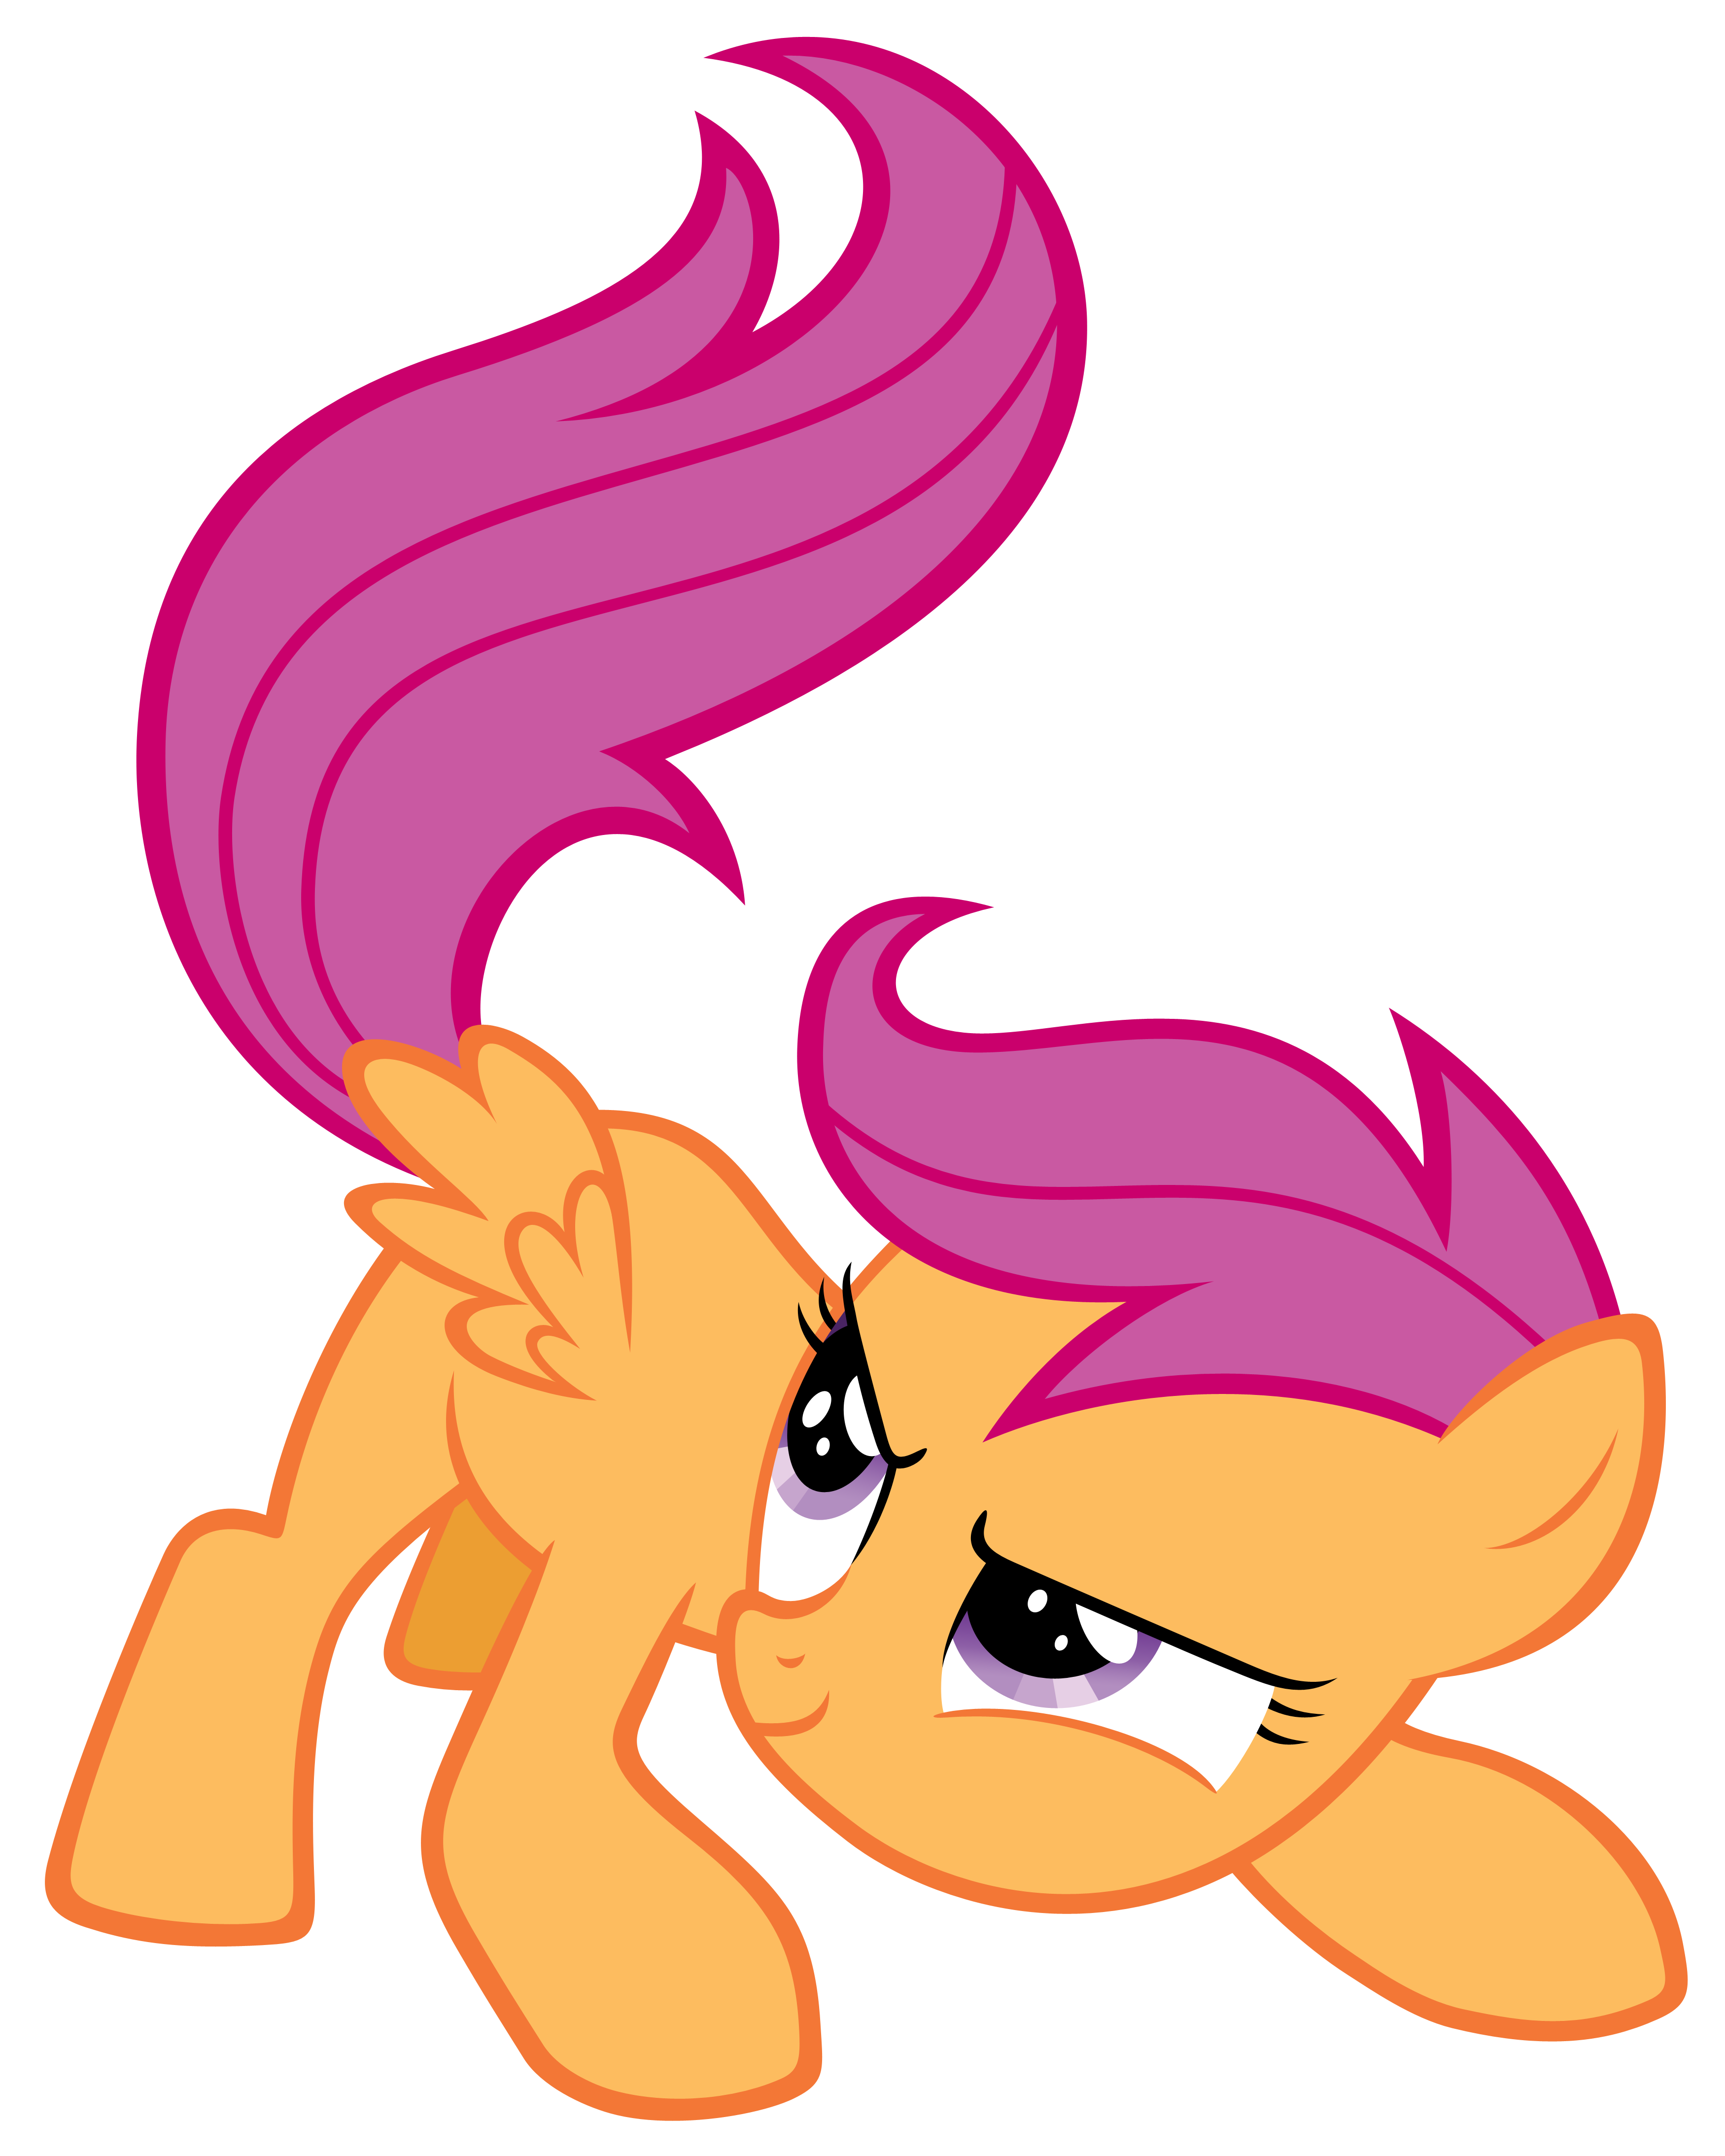 scootaloo_braking_by_stabzor-d4kt9ut.png